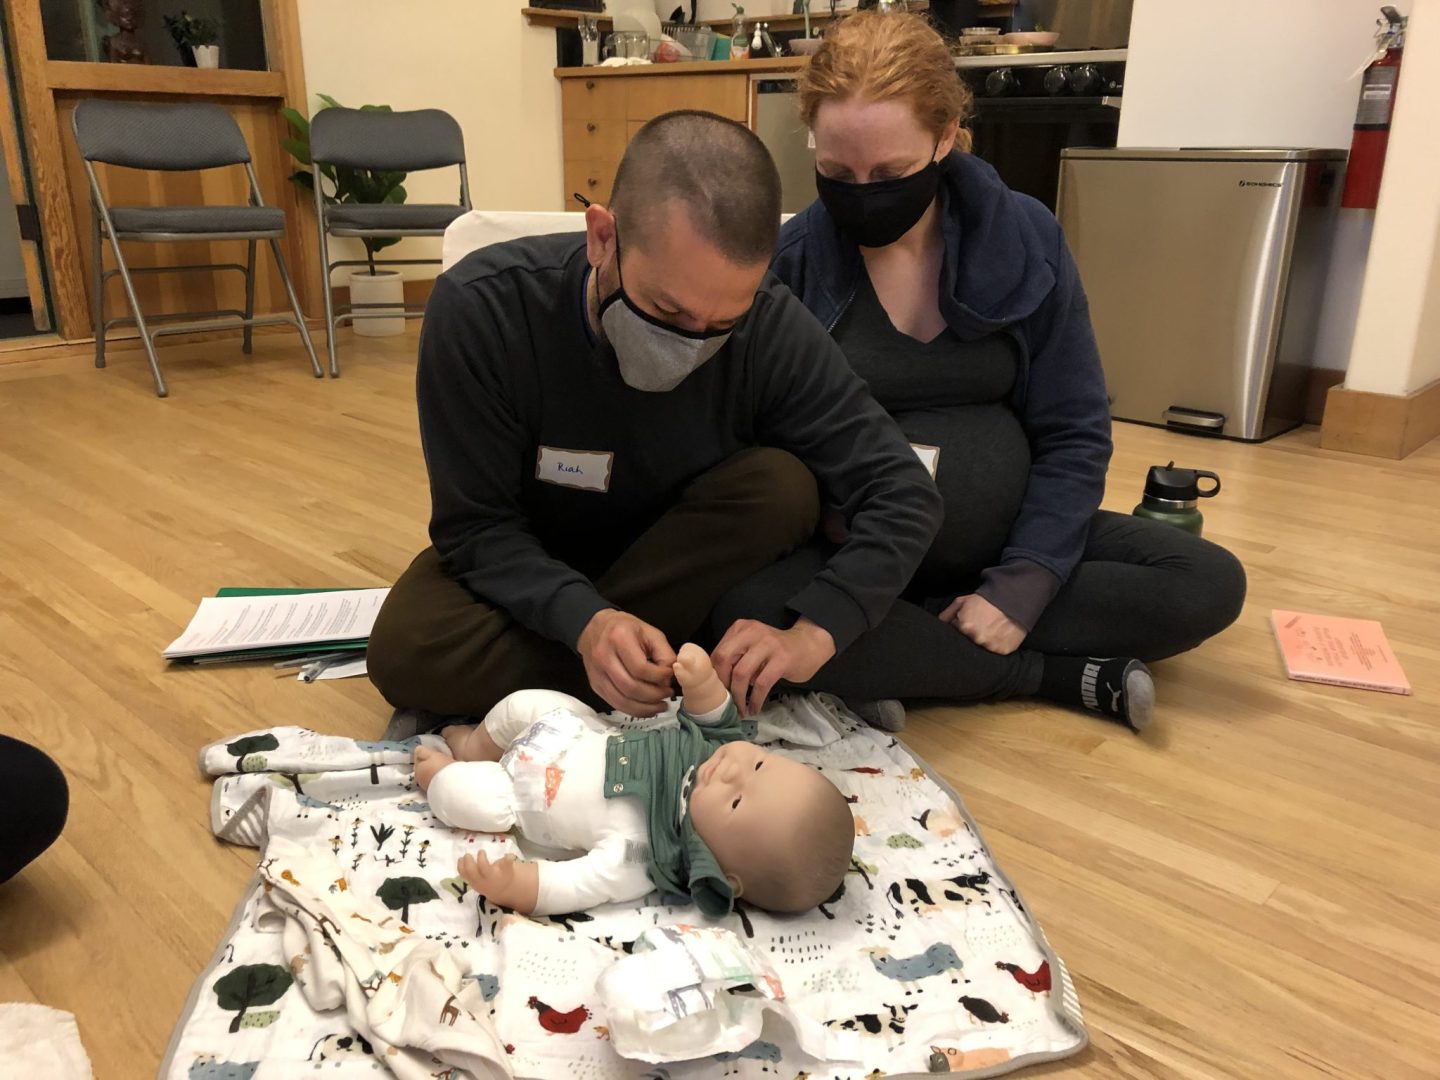 Parents at a RIE® Before Baby™ Course practice a diaper change modeling the RIE Principles and Practices they explored during the class.